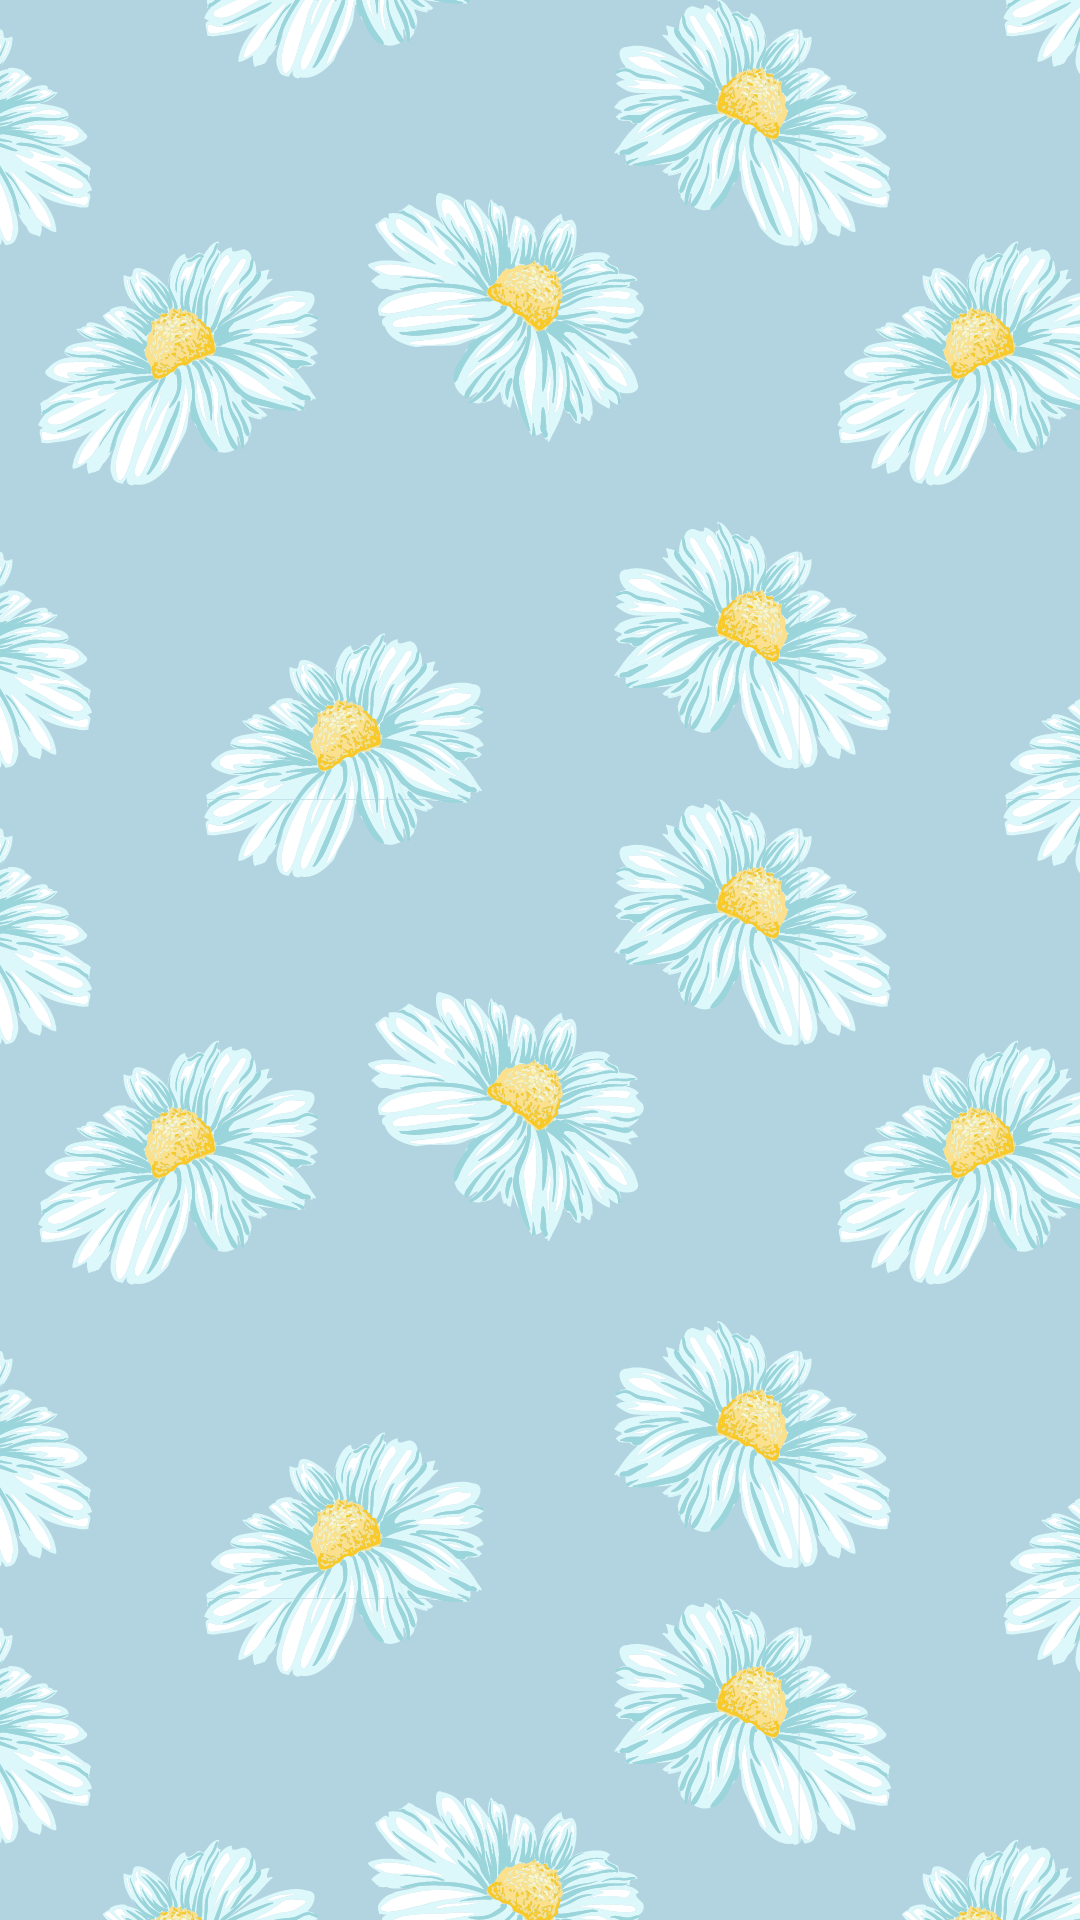 A blue and white floral wallpaper - Spring, daisy